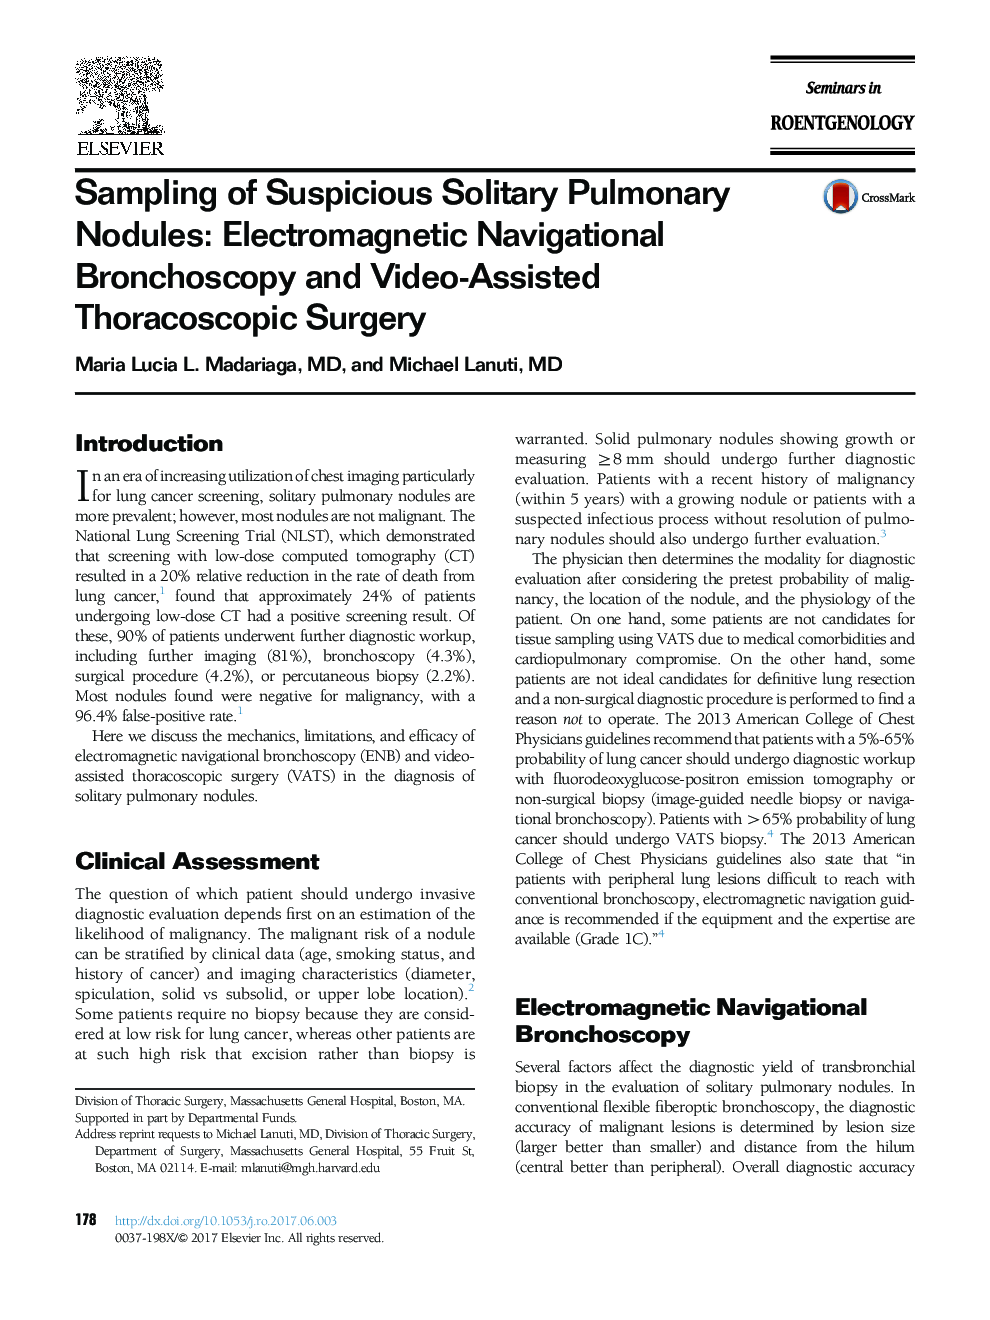 Sampling of Suspicious Solitary Pulmonary Nodules: Electromagnetic Navigational Bronchoscopy and Video-Assisted Thoracoscopic Surgery